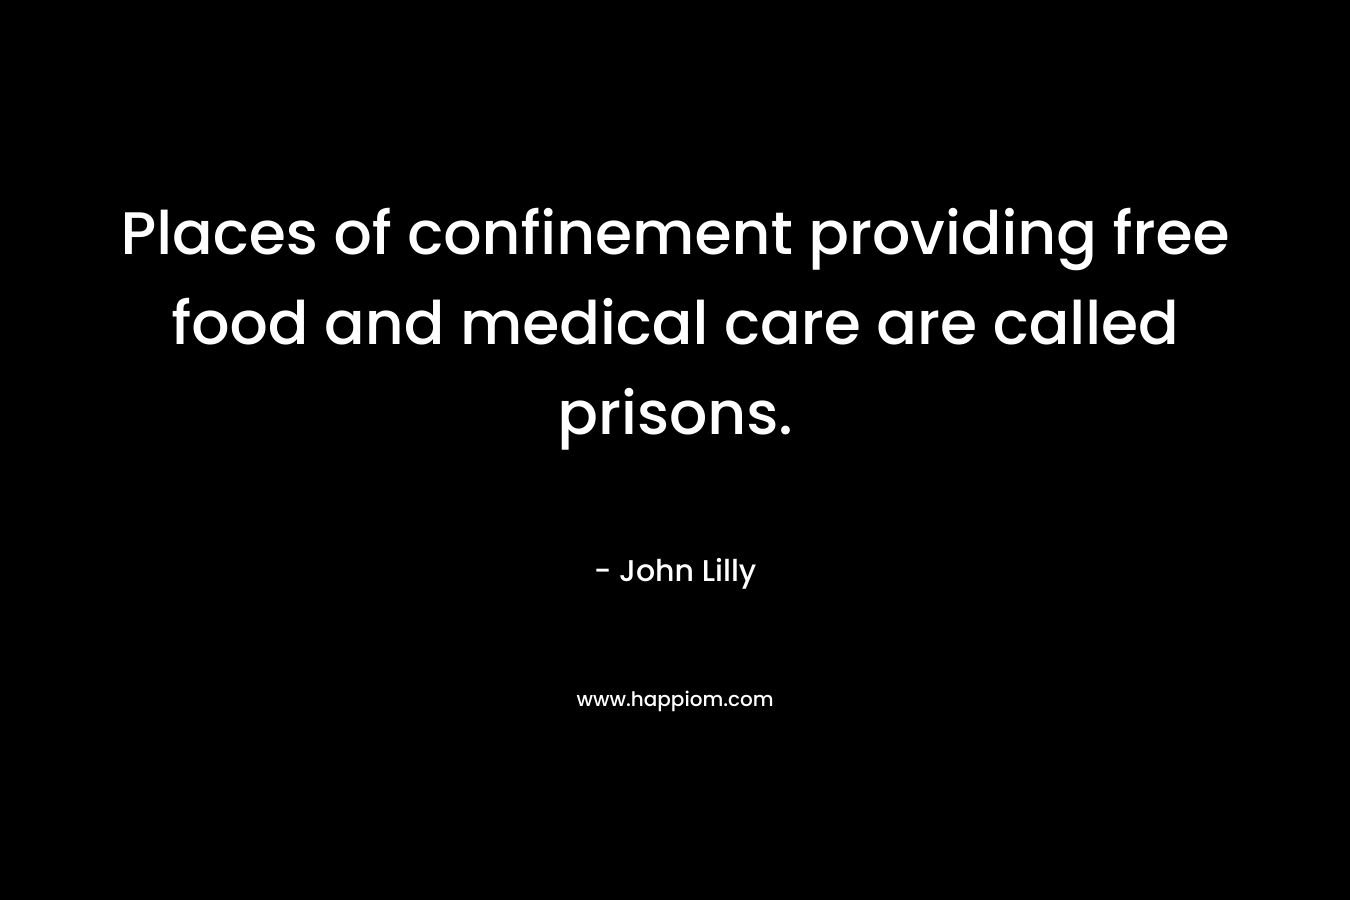 Places of confinement providing free food and medical care are called prisons. – John Lilly